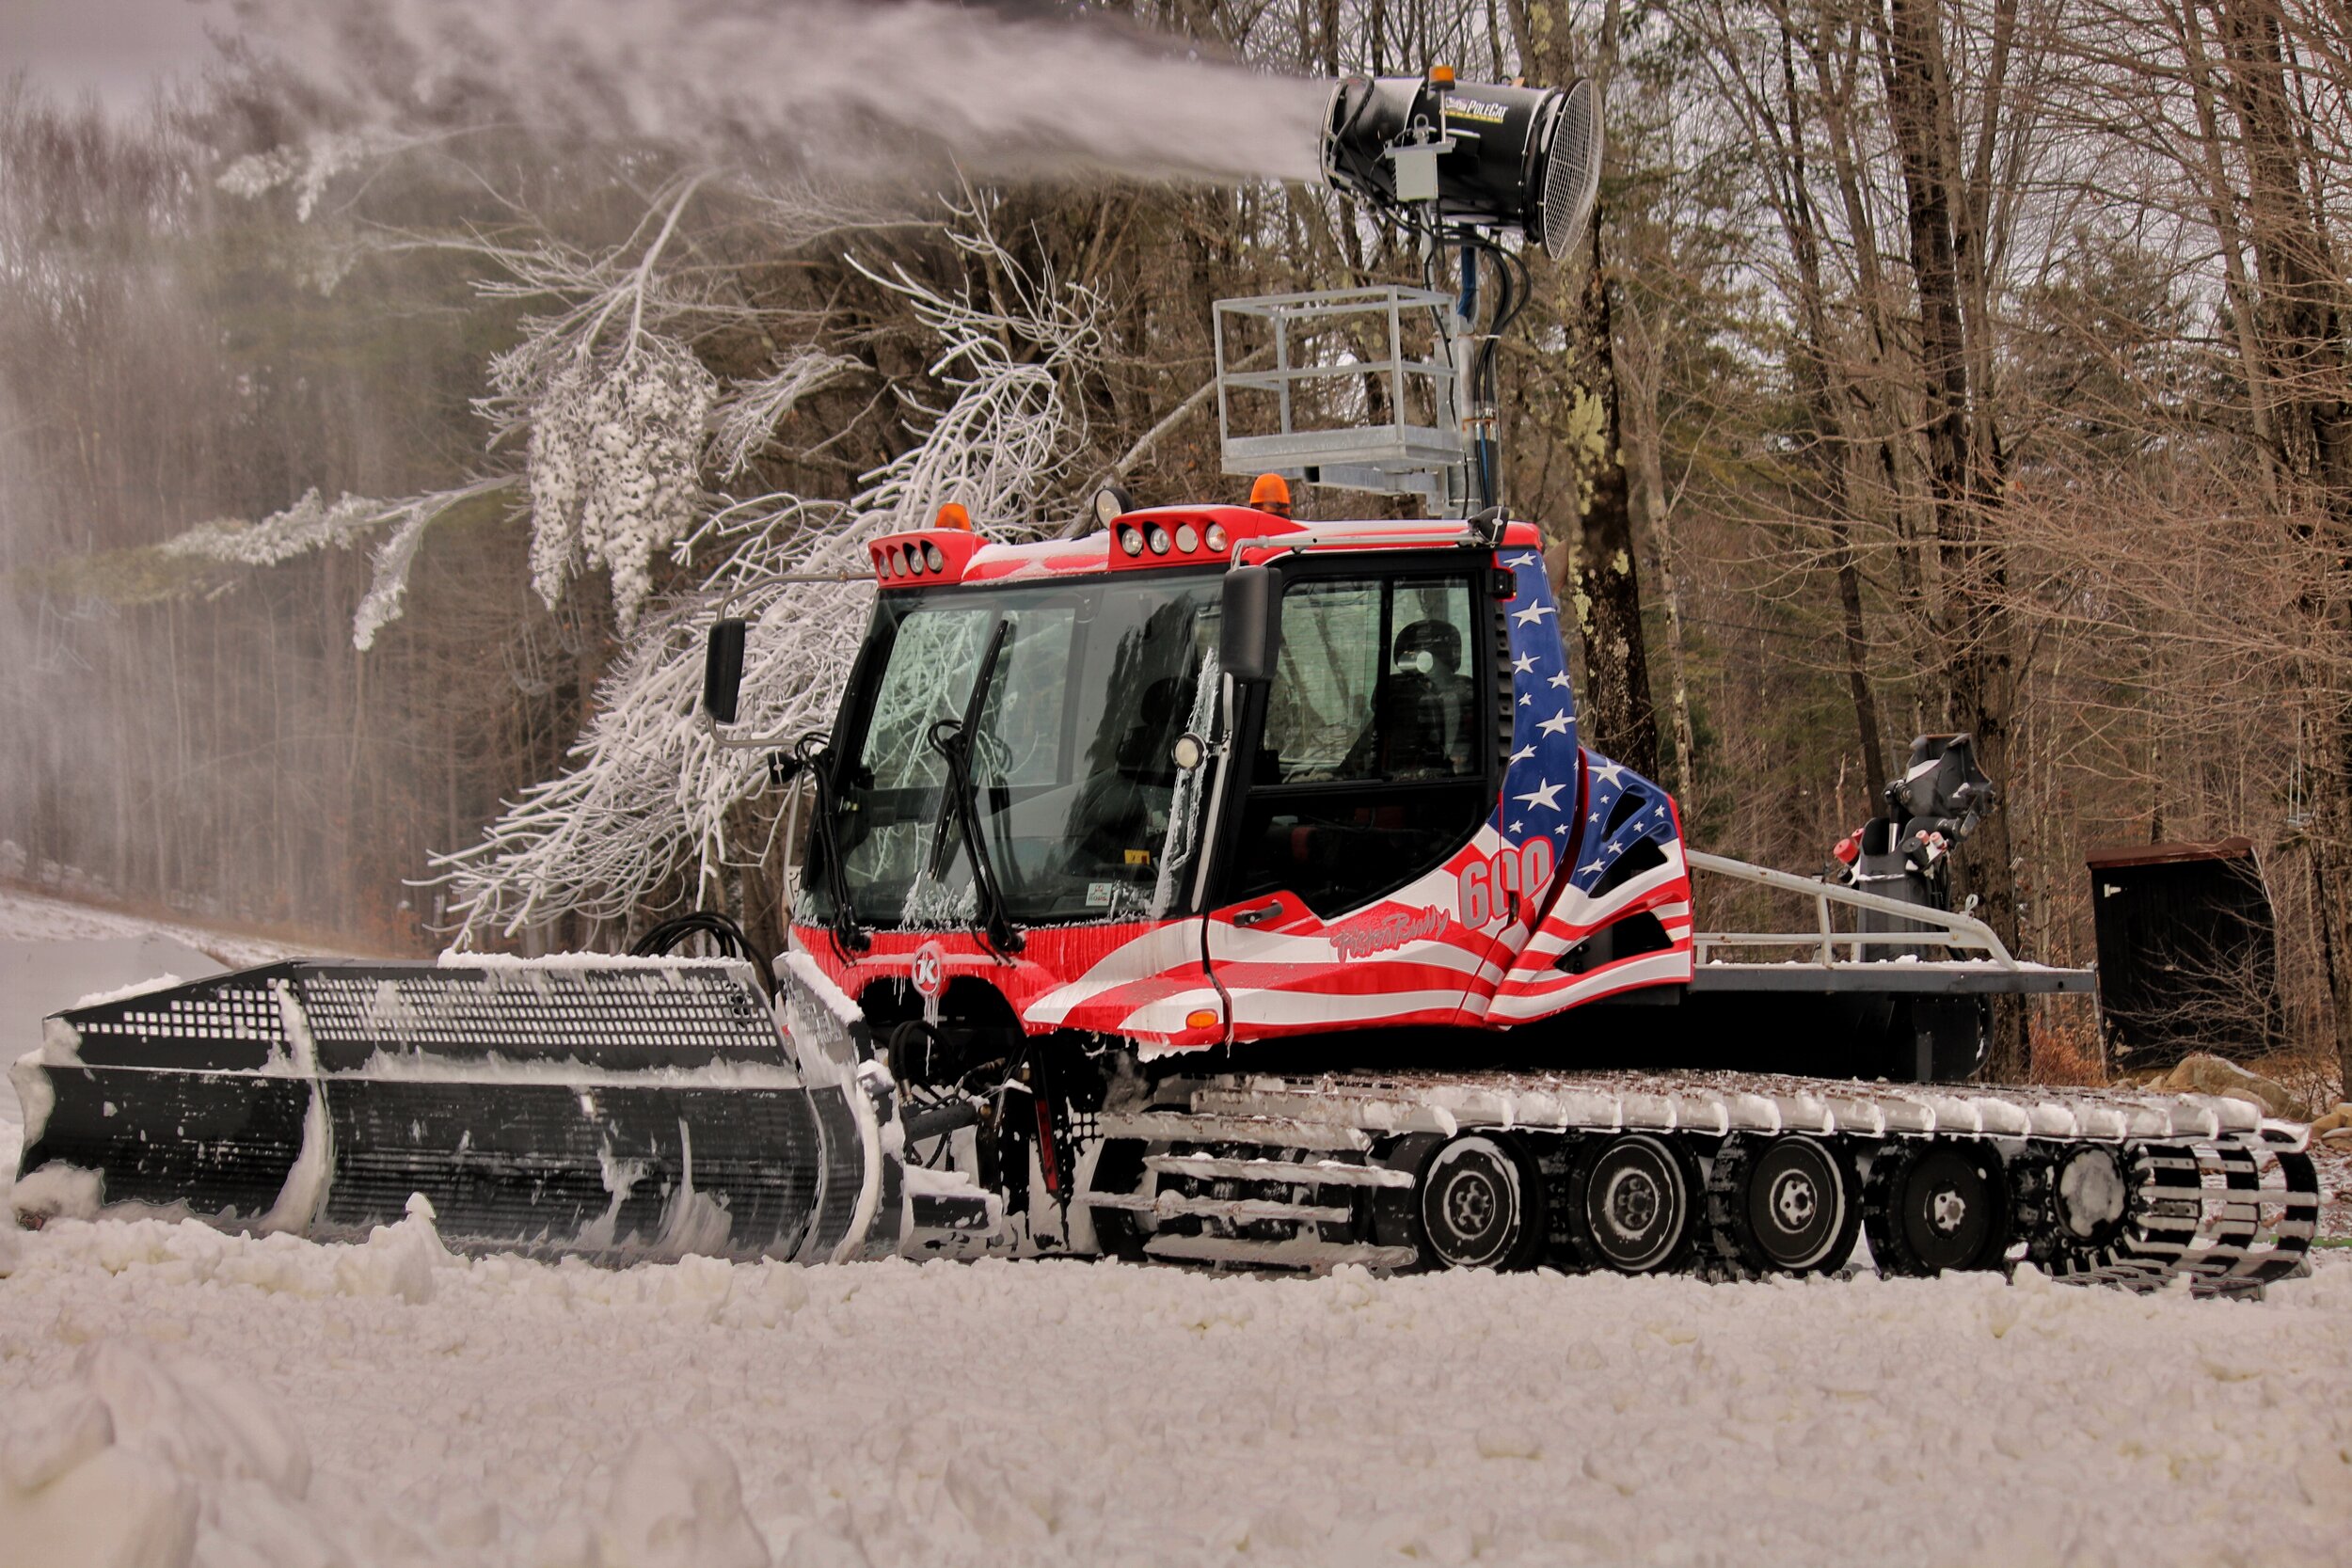   USA PistenBully 600   Providing perfect sking conditions at all times! 